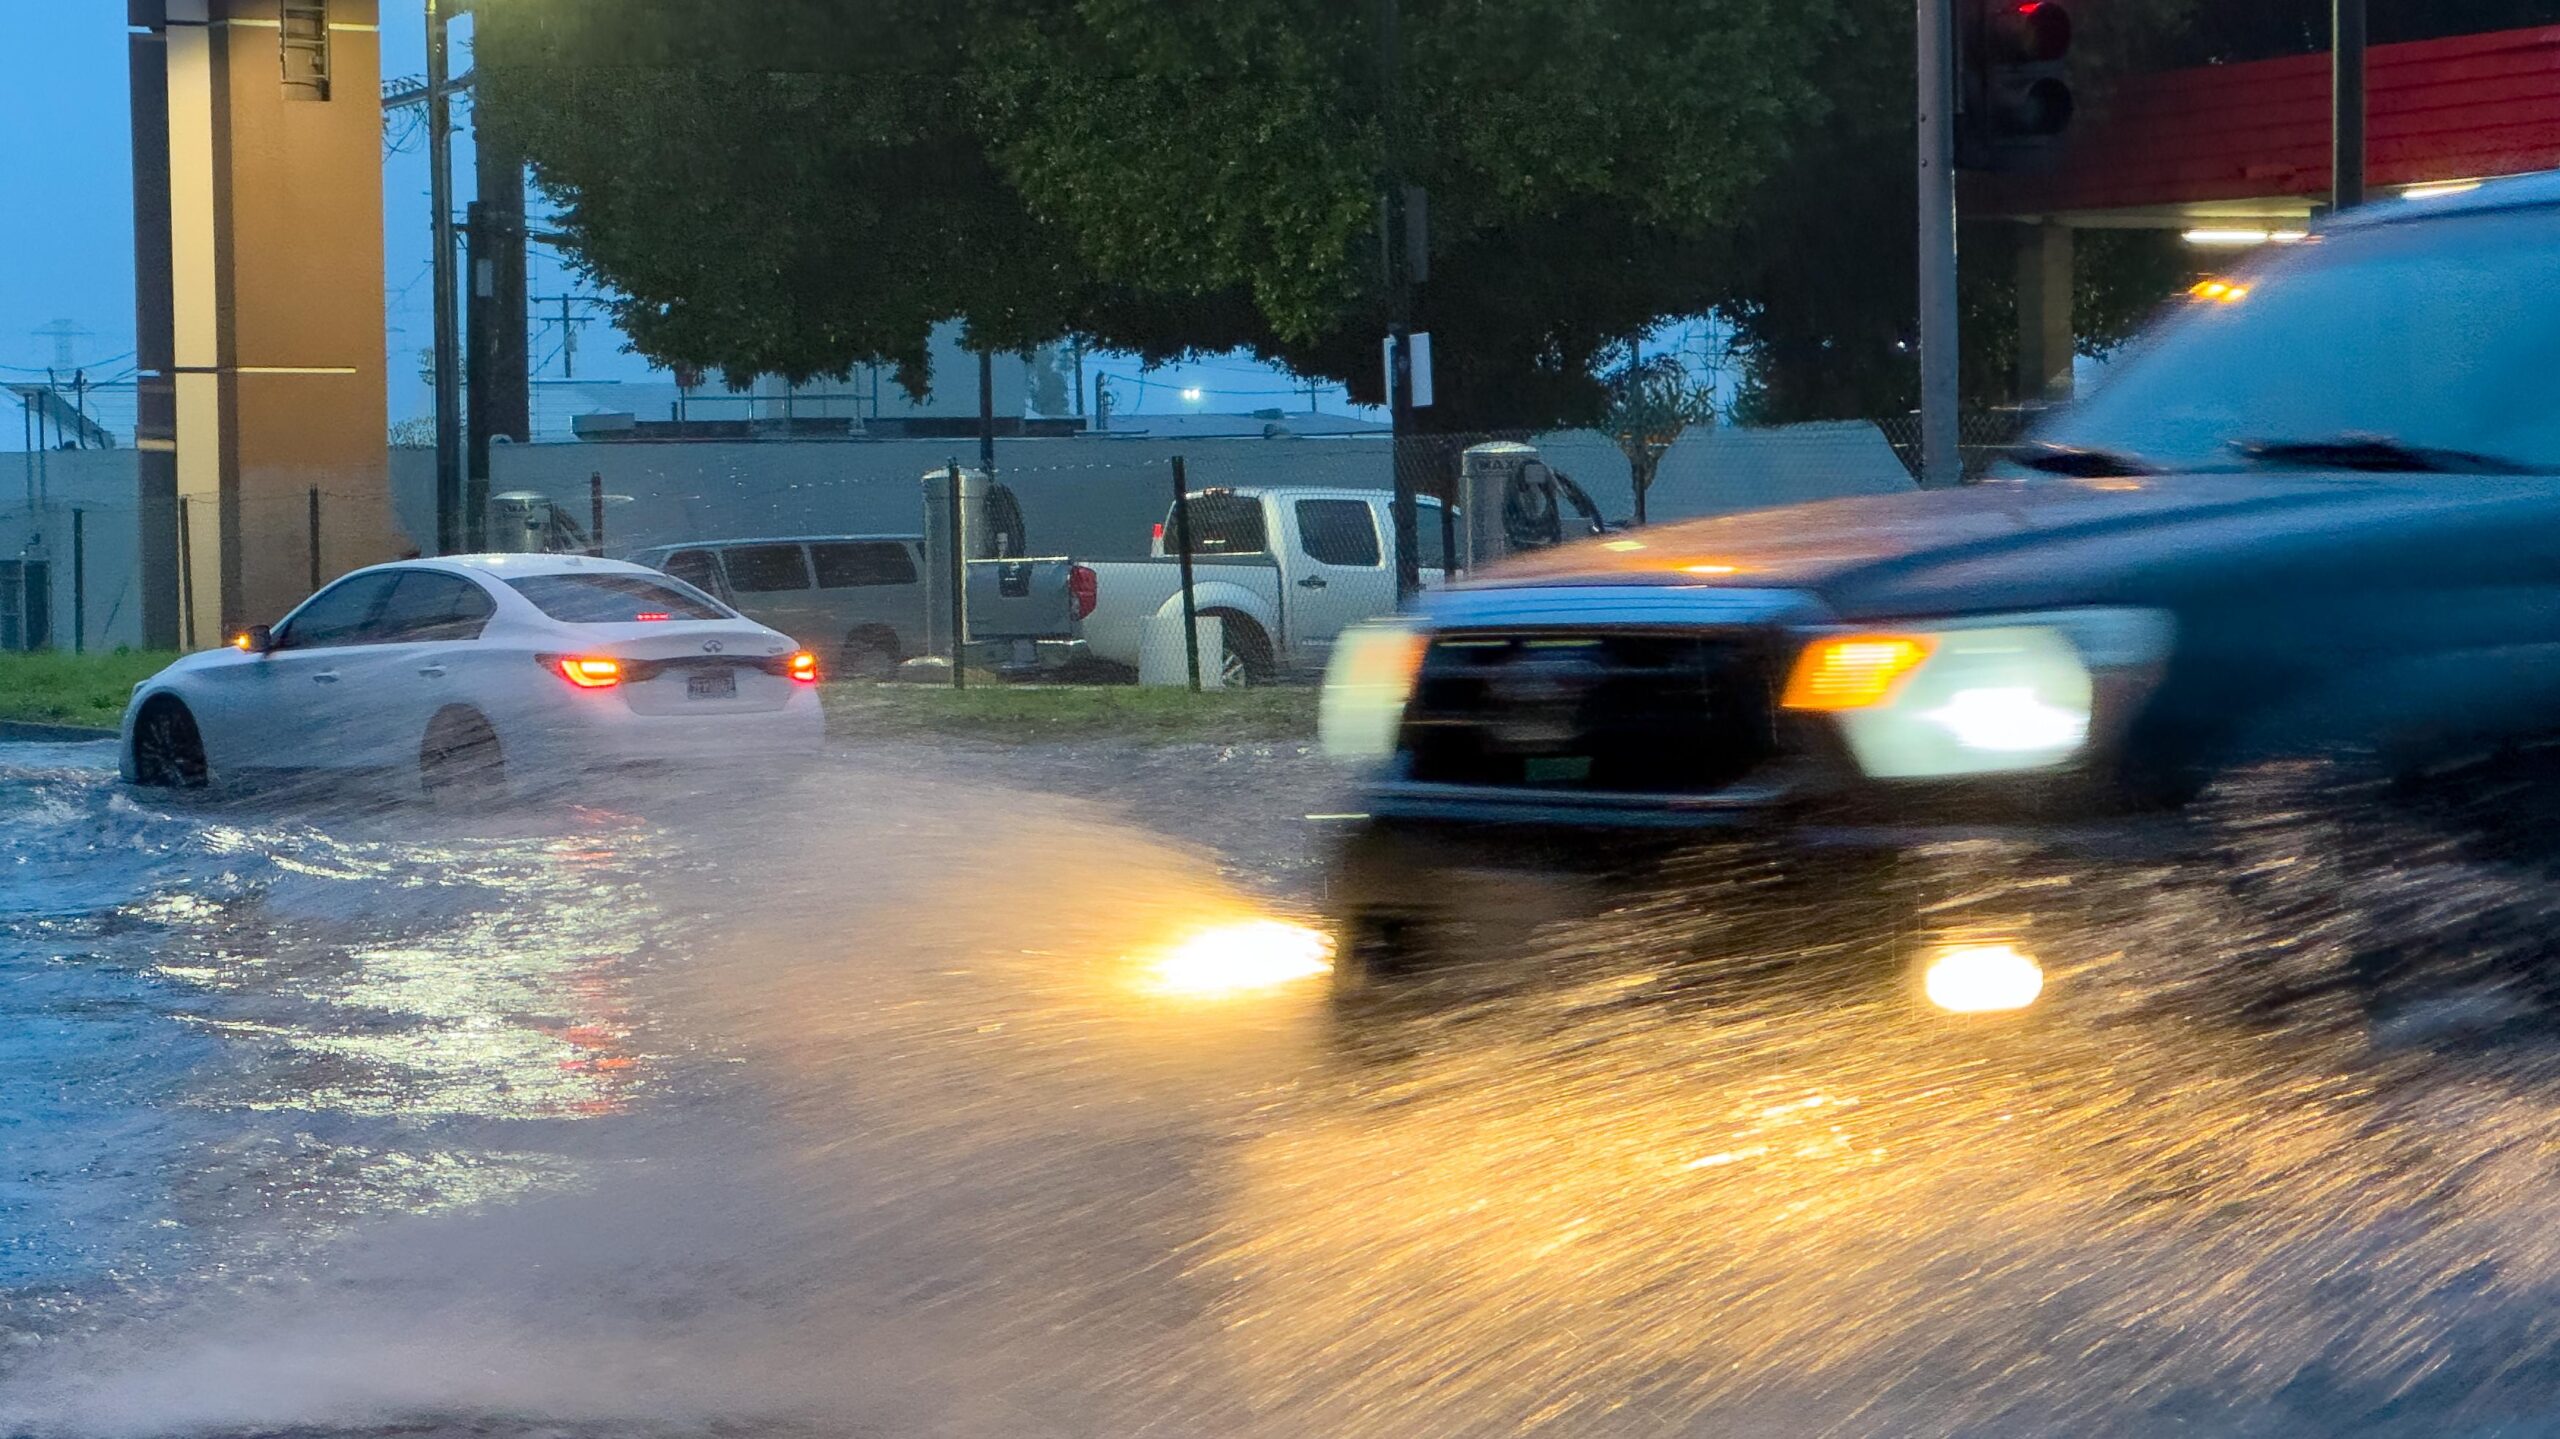 Cars drive through deep flooded streets during a winter storm.